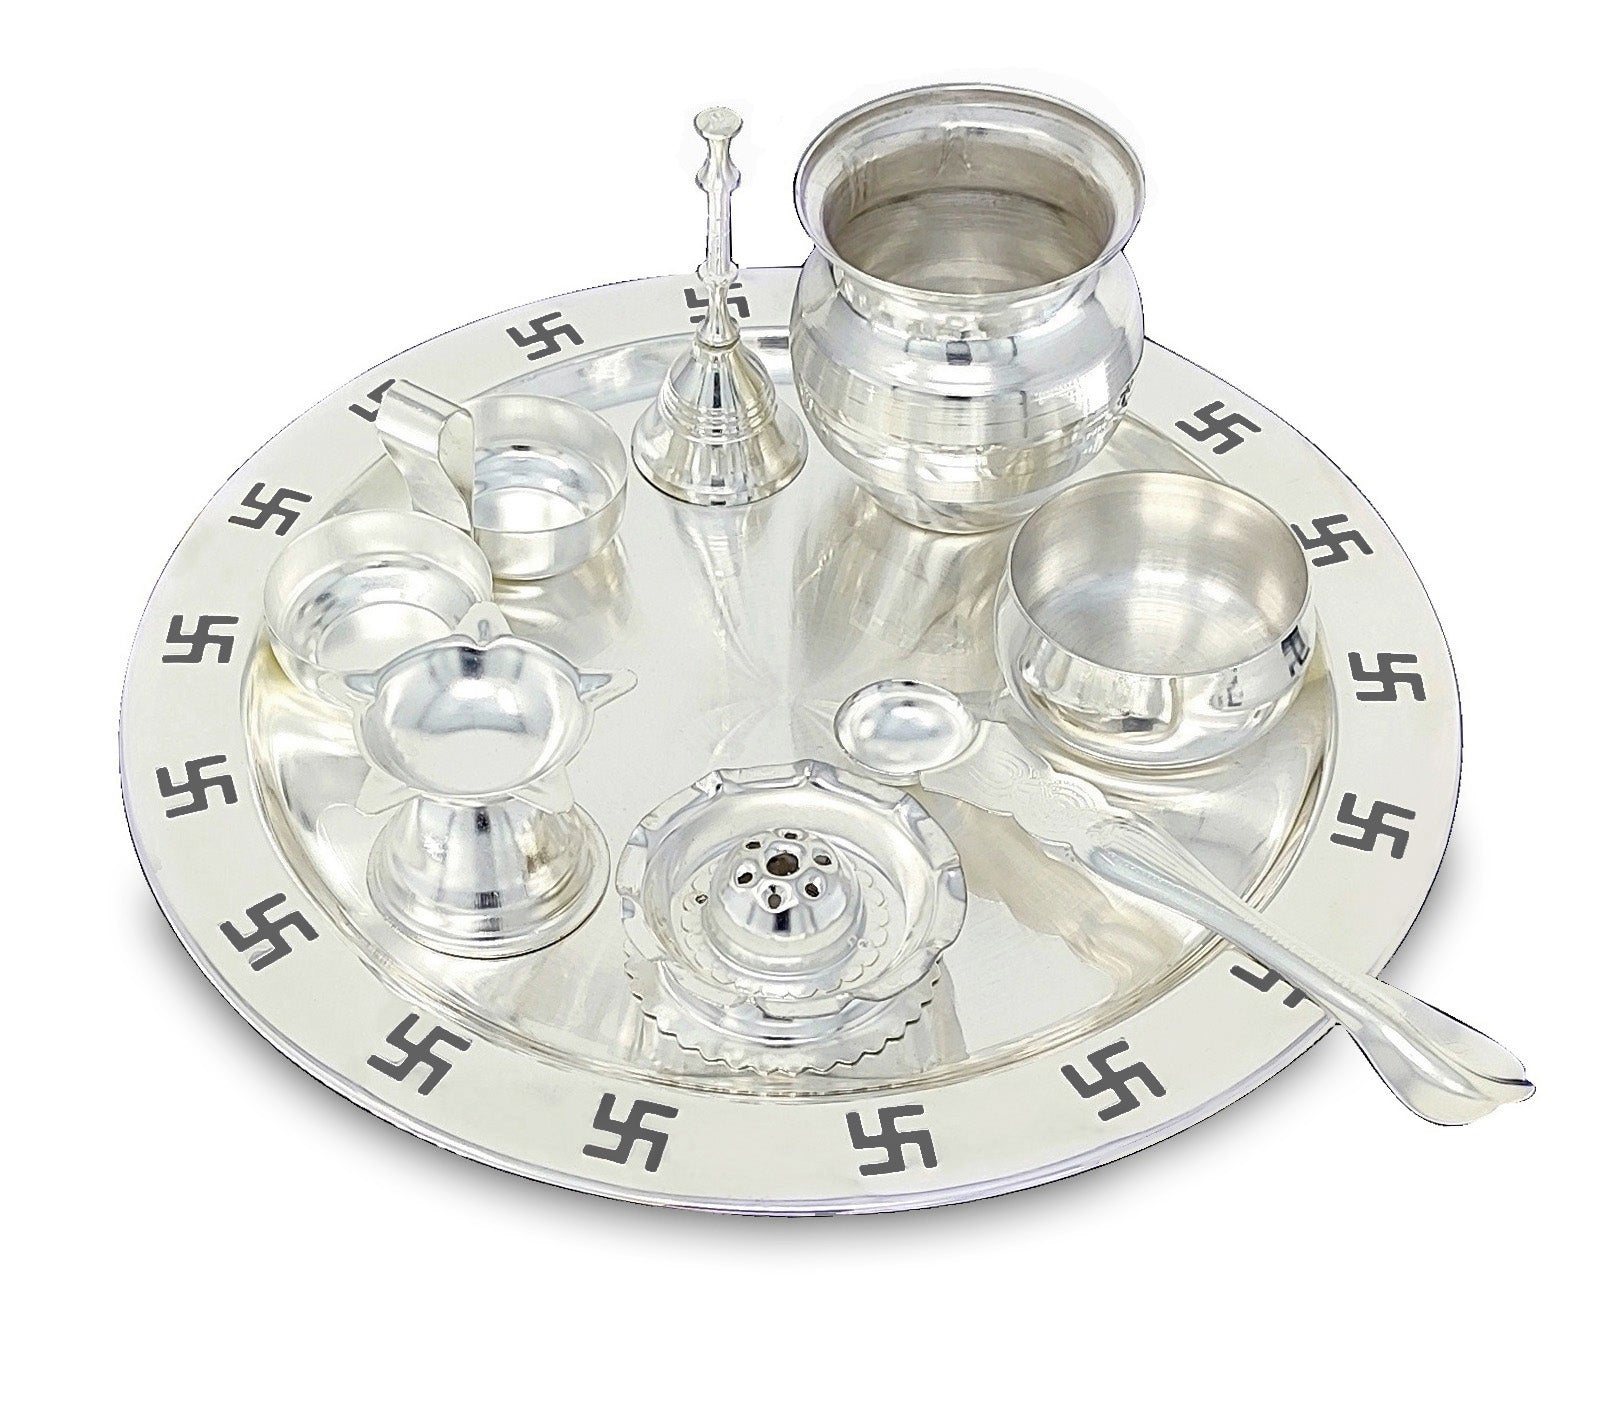 BENGALEN Pooja Thali Set Silver Plated with Gray Gift Box